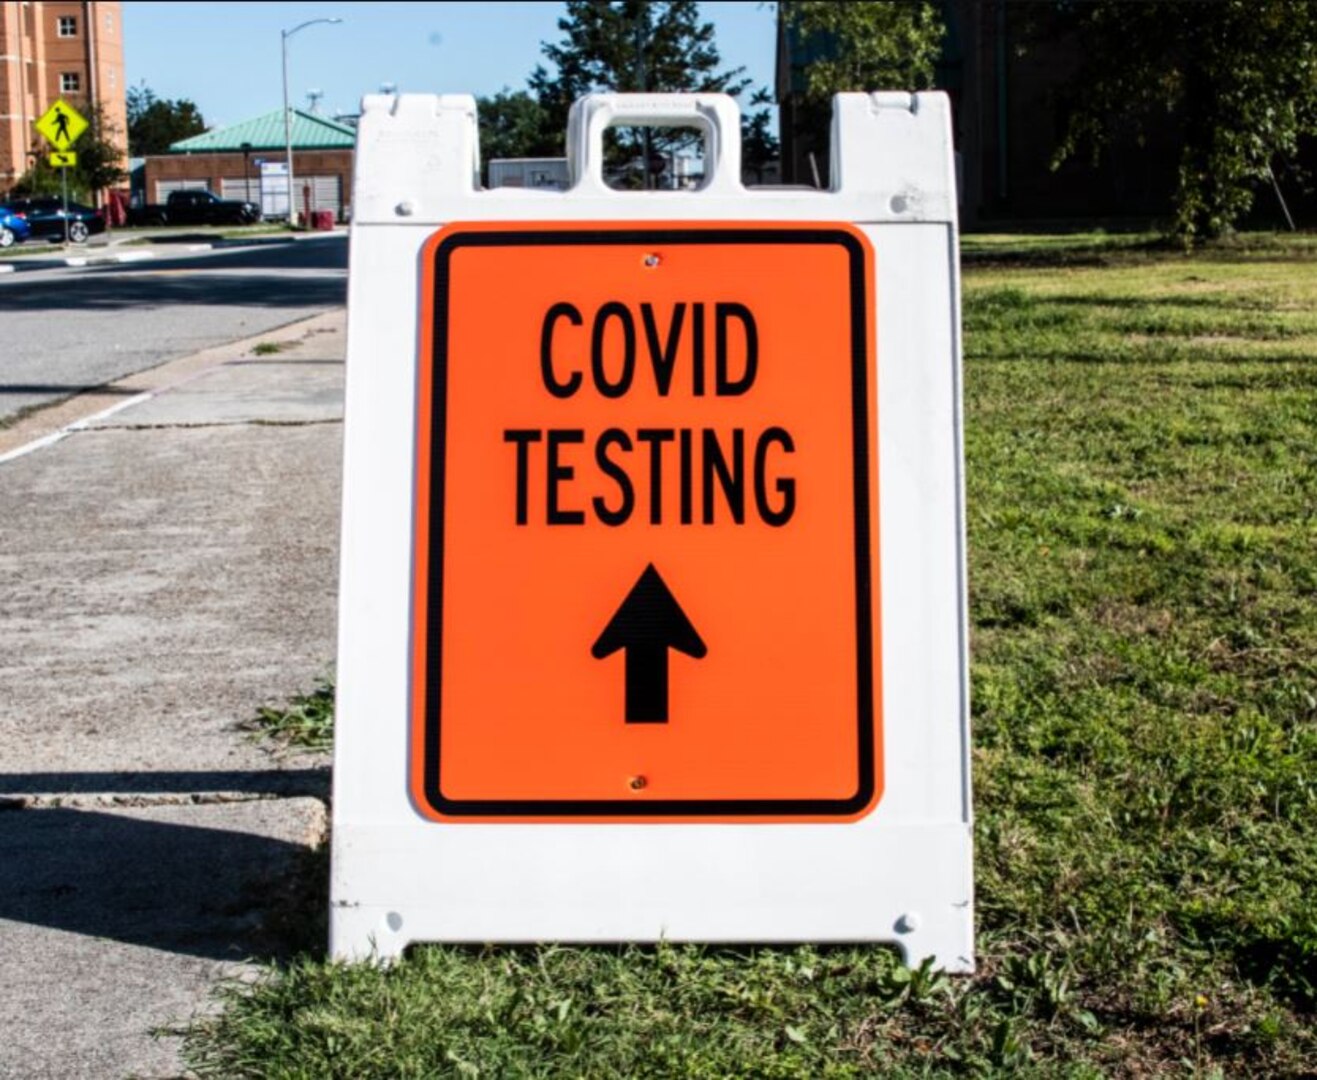 PORTSMOUTH, Va. (Sept, 10, 2021) – Naval Medical Center Portsmouth (NMCP) reestablished its outdoor COVID-19 testing tents, Sept. 10.